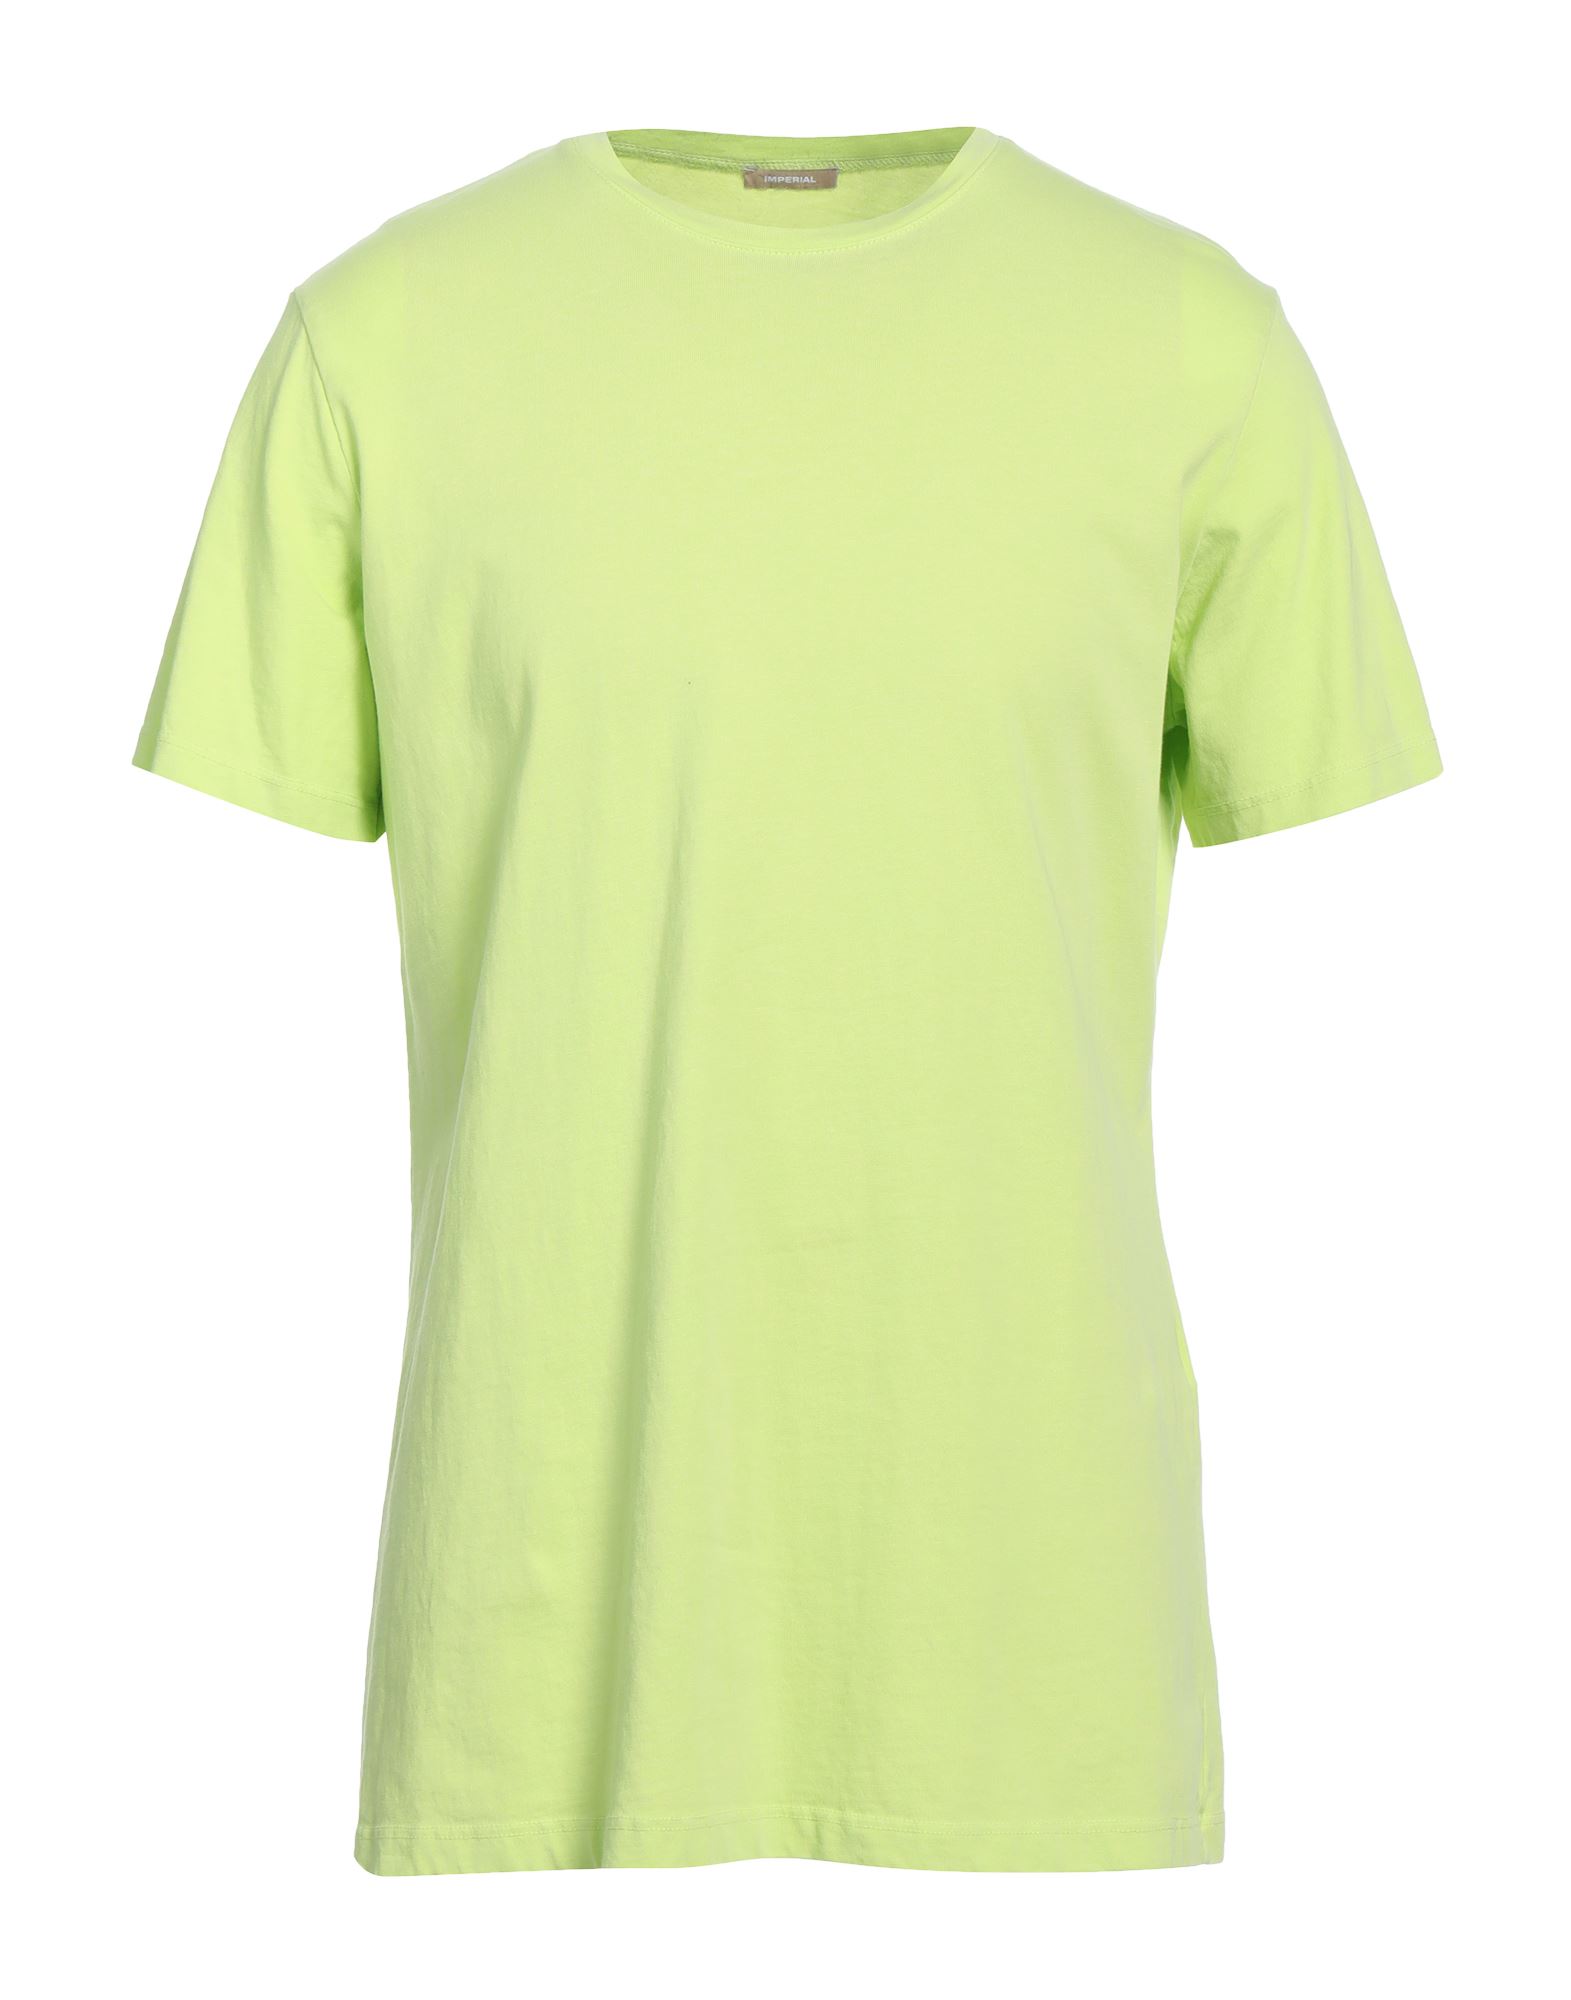 IMPERIAL IMPERIAL MAN T-SHIRT LIGHT GREEN SIZE L COTTON